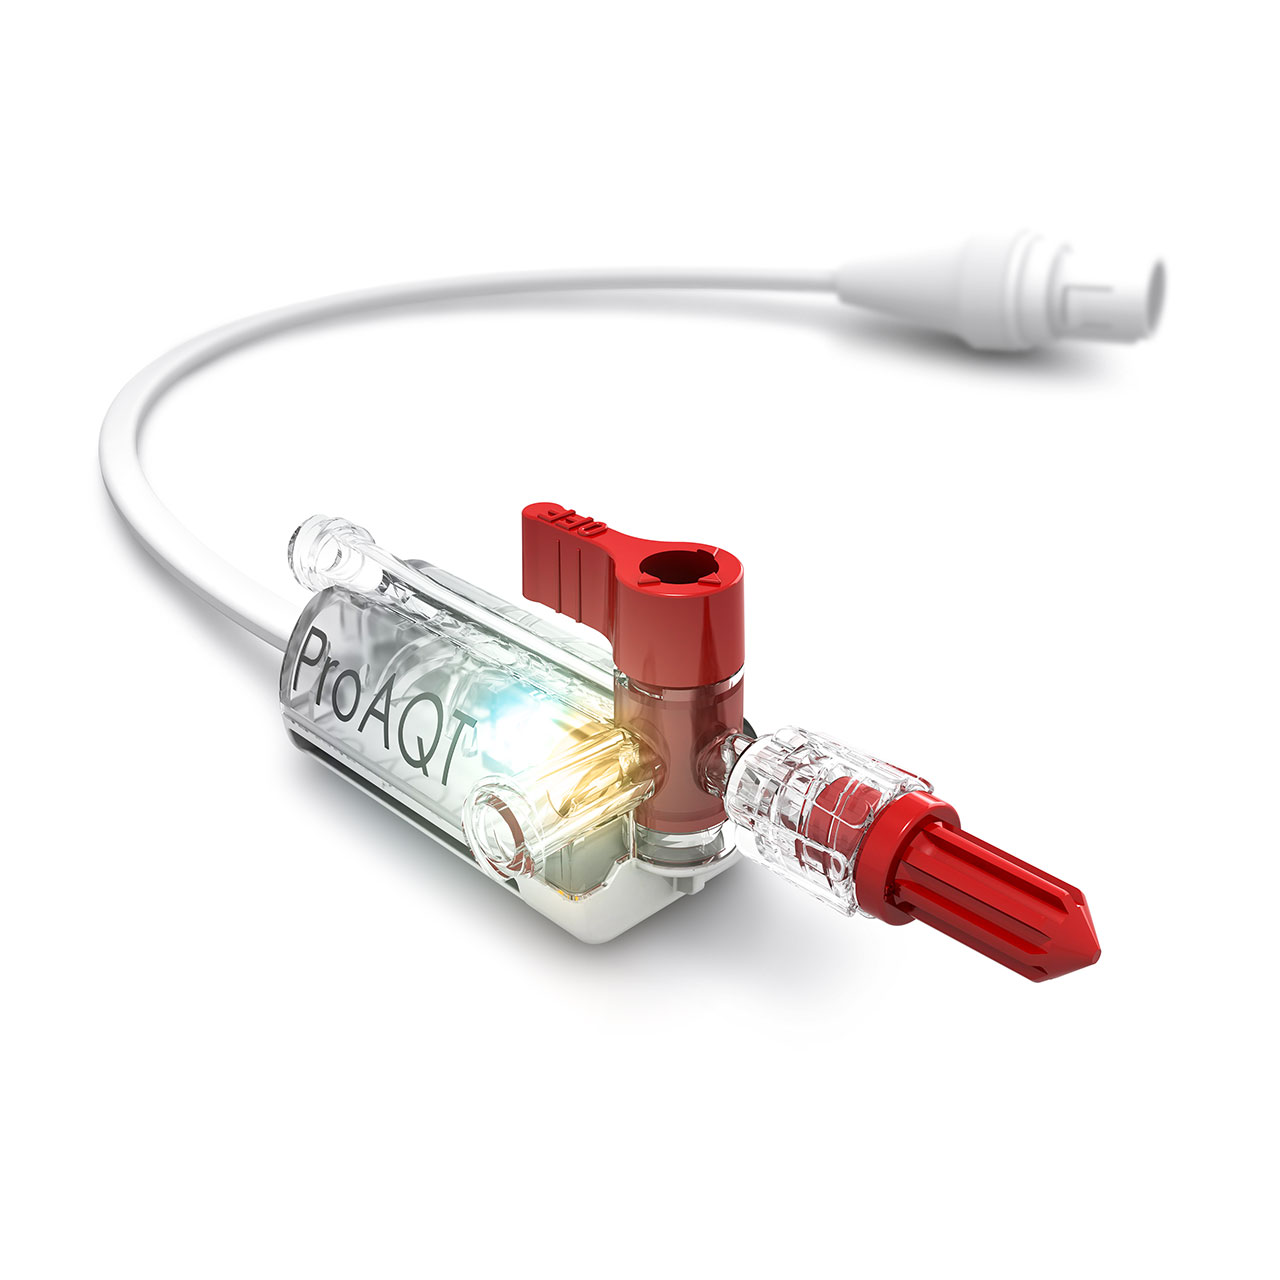 The ProAQT sensor provides parameters such as blood flow, volume responsiveness, afterload and contractility.